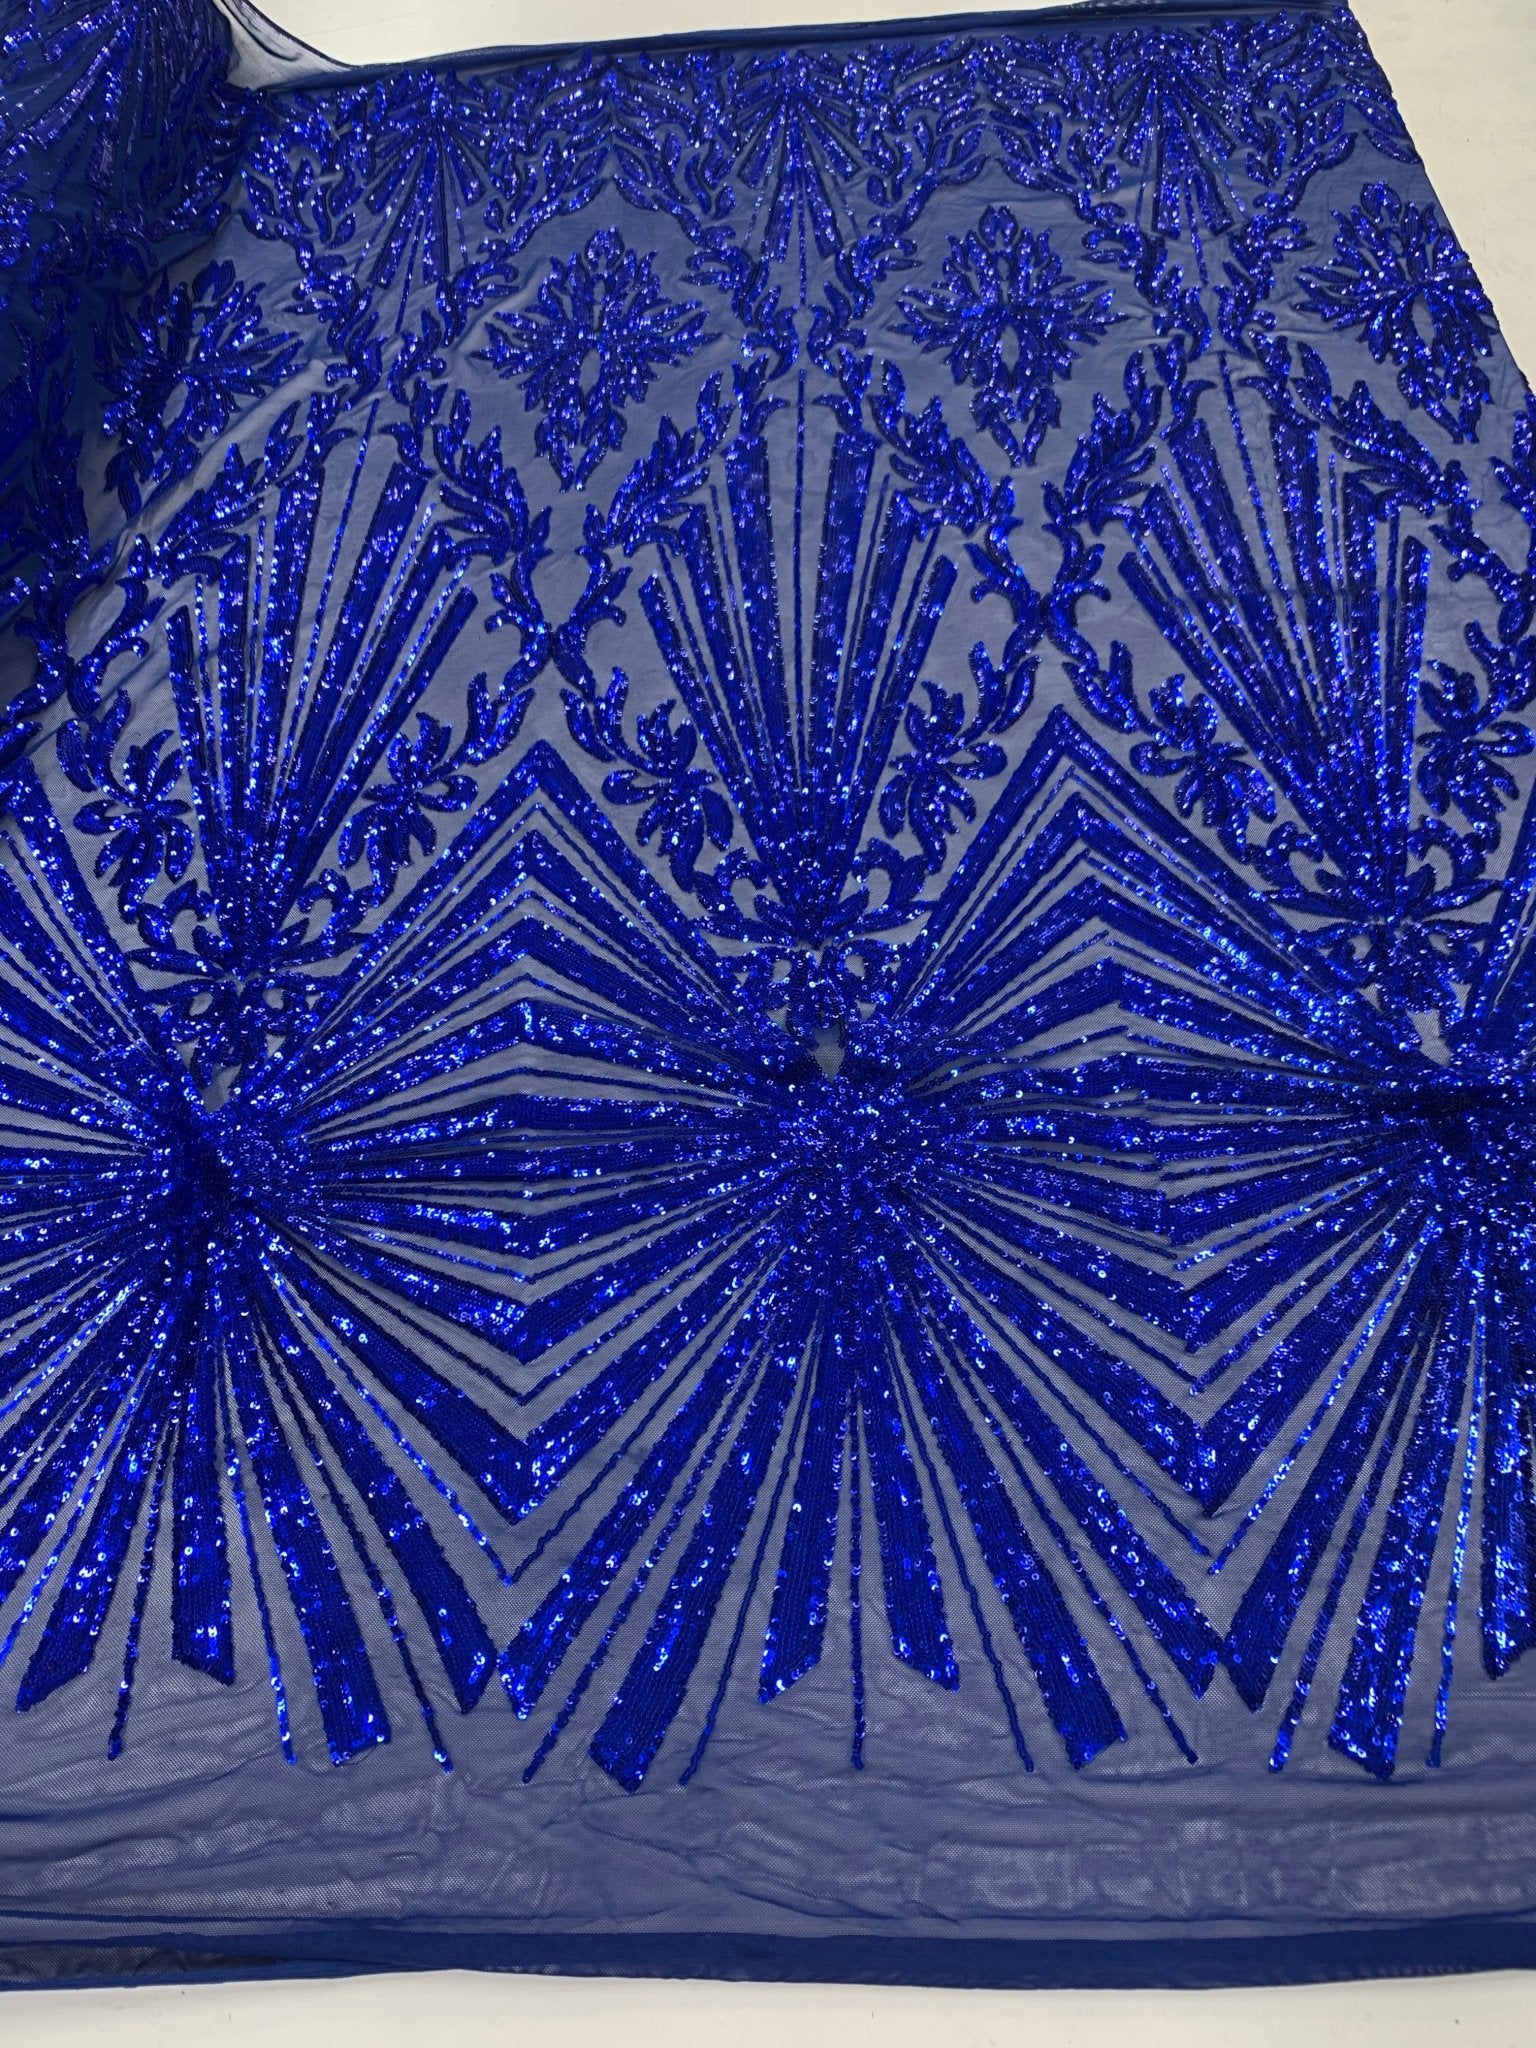 French Embroidery Stretch Sequins Fabric By The Yard on a Mesh LaceICEFABRICICE FABRICSRoyal BlueFrench Embroidery Stretch Sequins Fabric By The Yard on a Mesh Lace ICEFABRIC Royal Blue